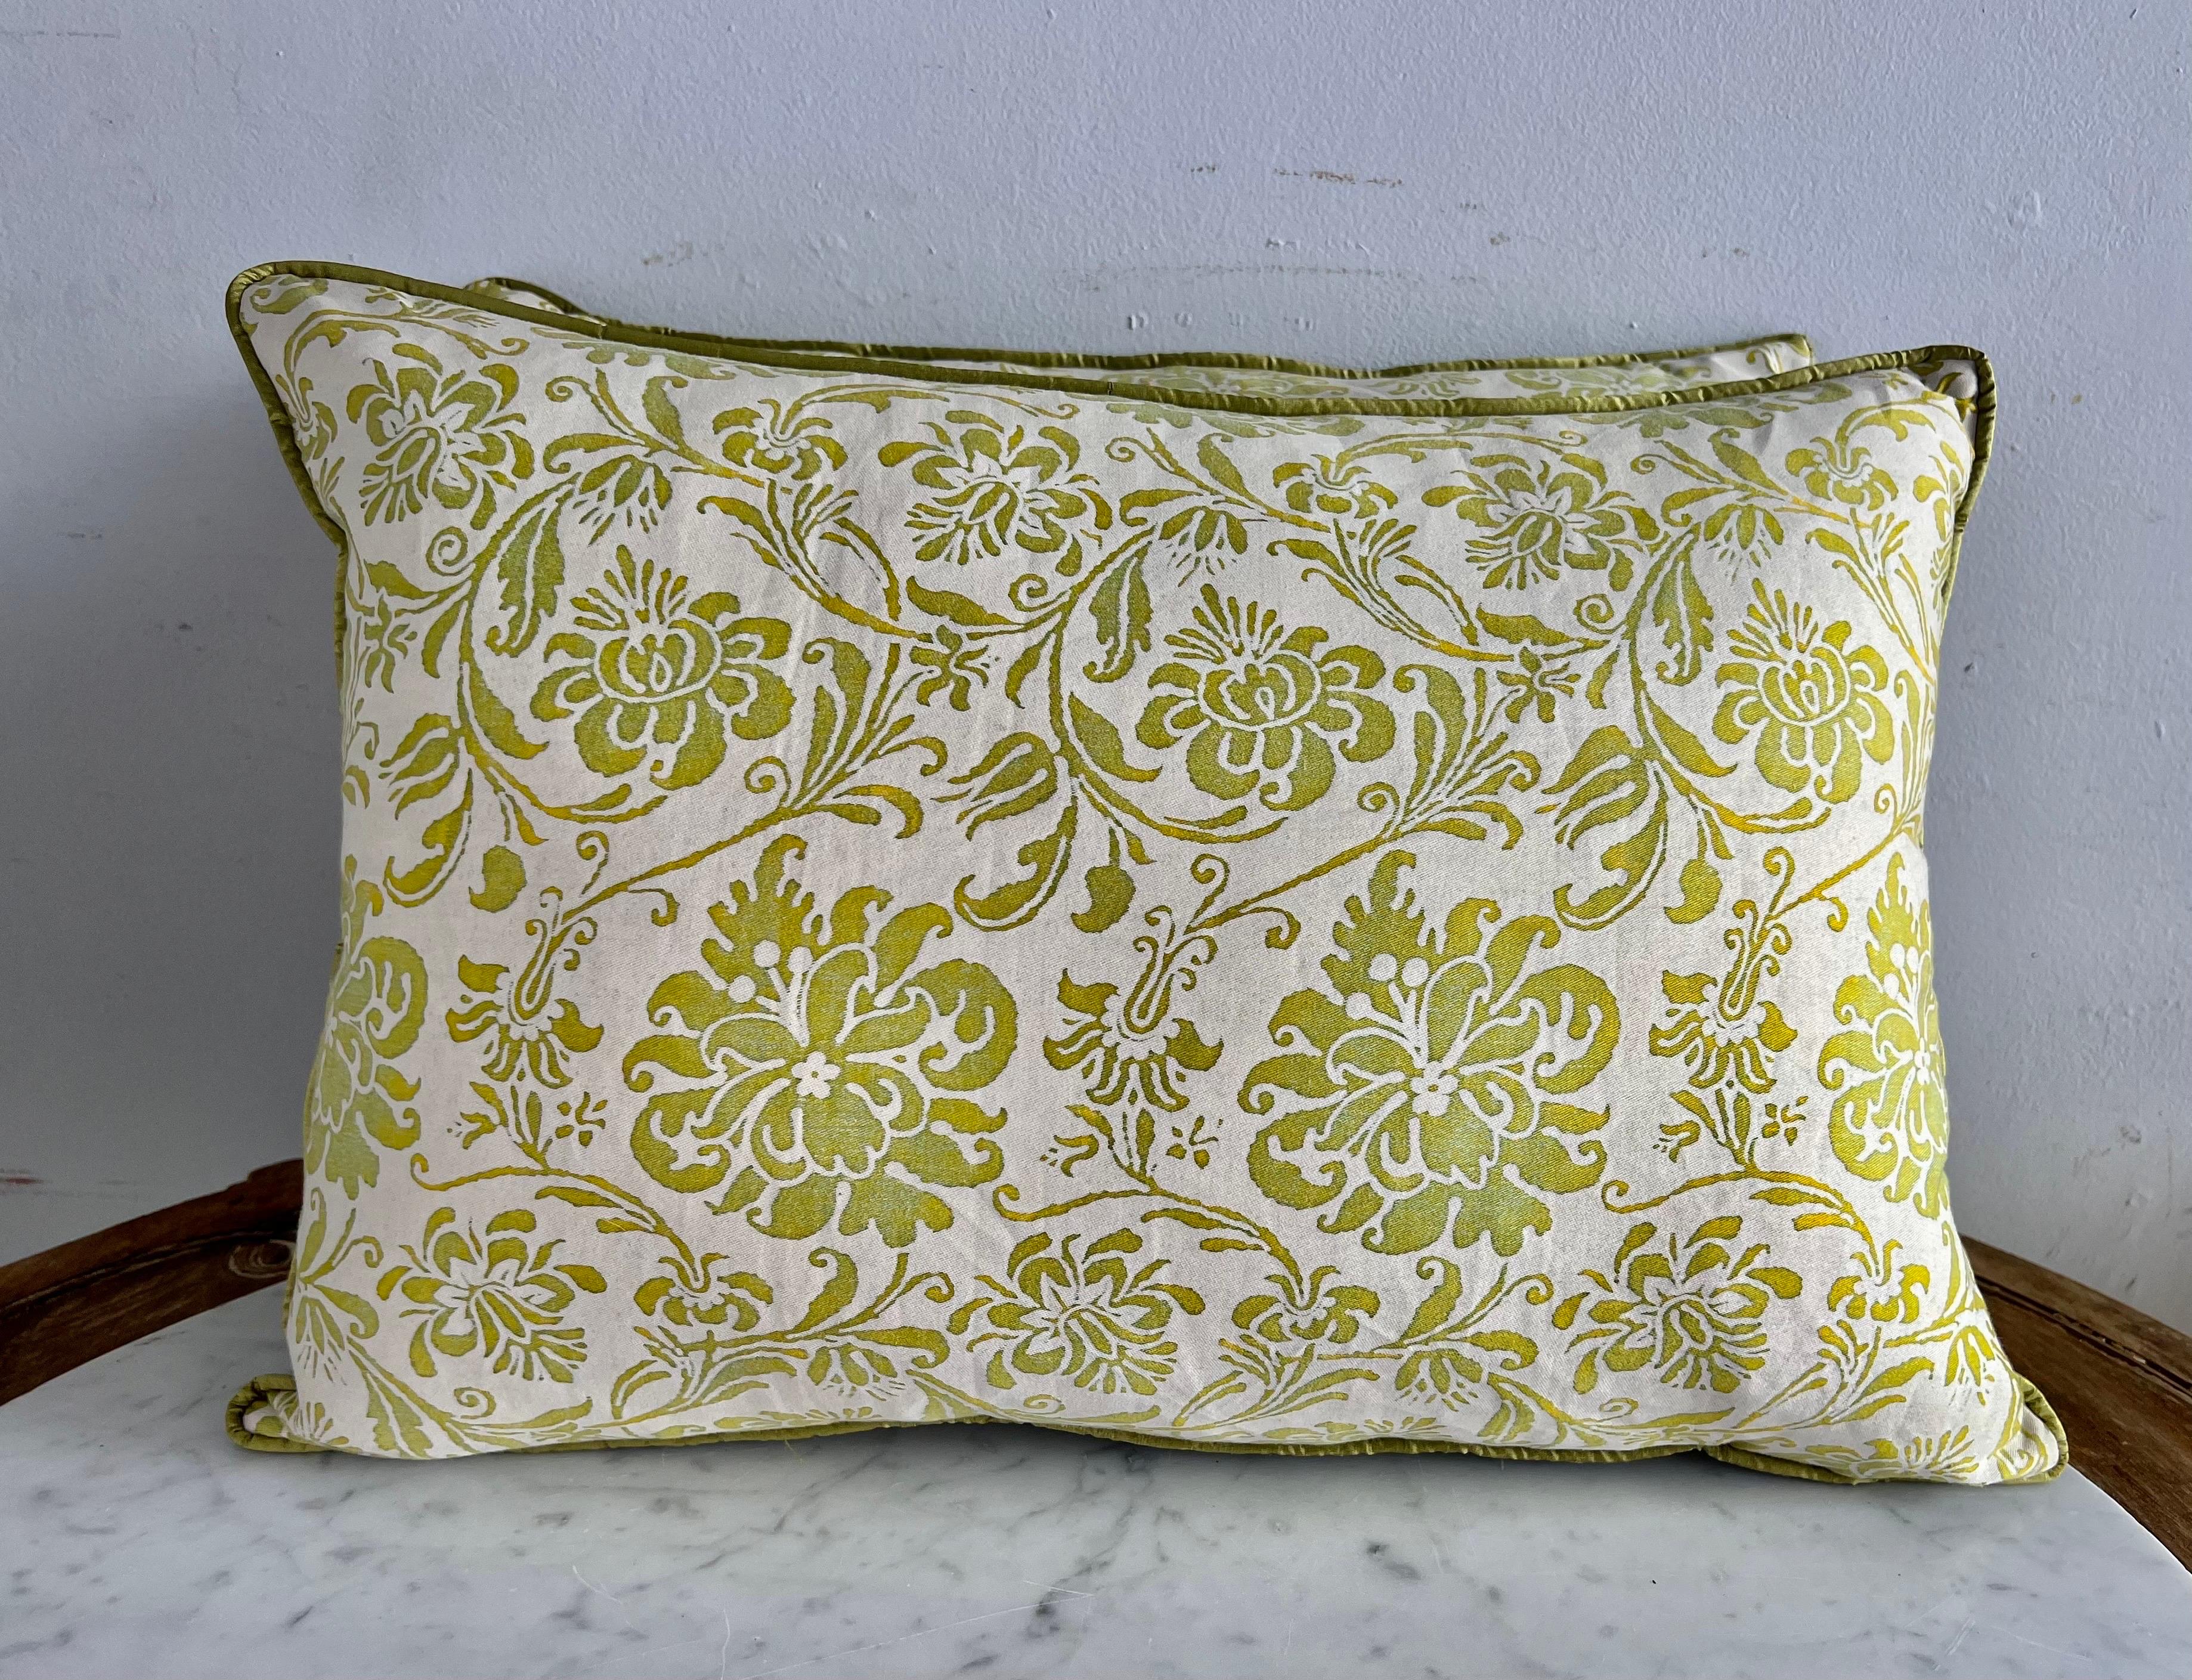 Pair of custom pillows made with green & white Fortuny textile fronts and green silk backs. Pattern depicts swirling flowers throughout. Self cord detail. Sewn closed.